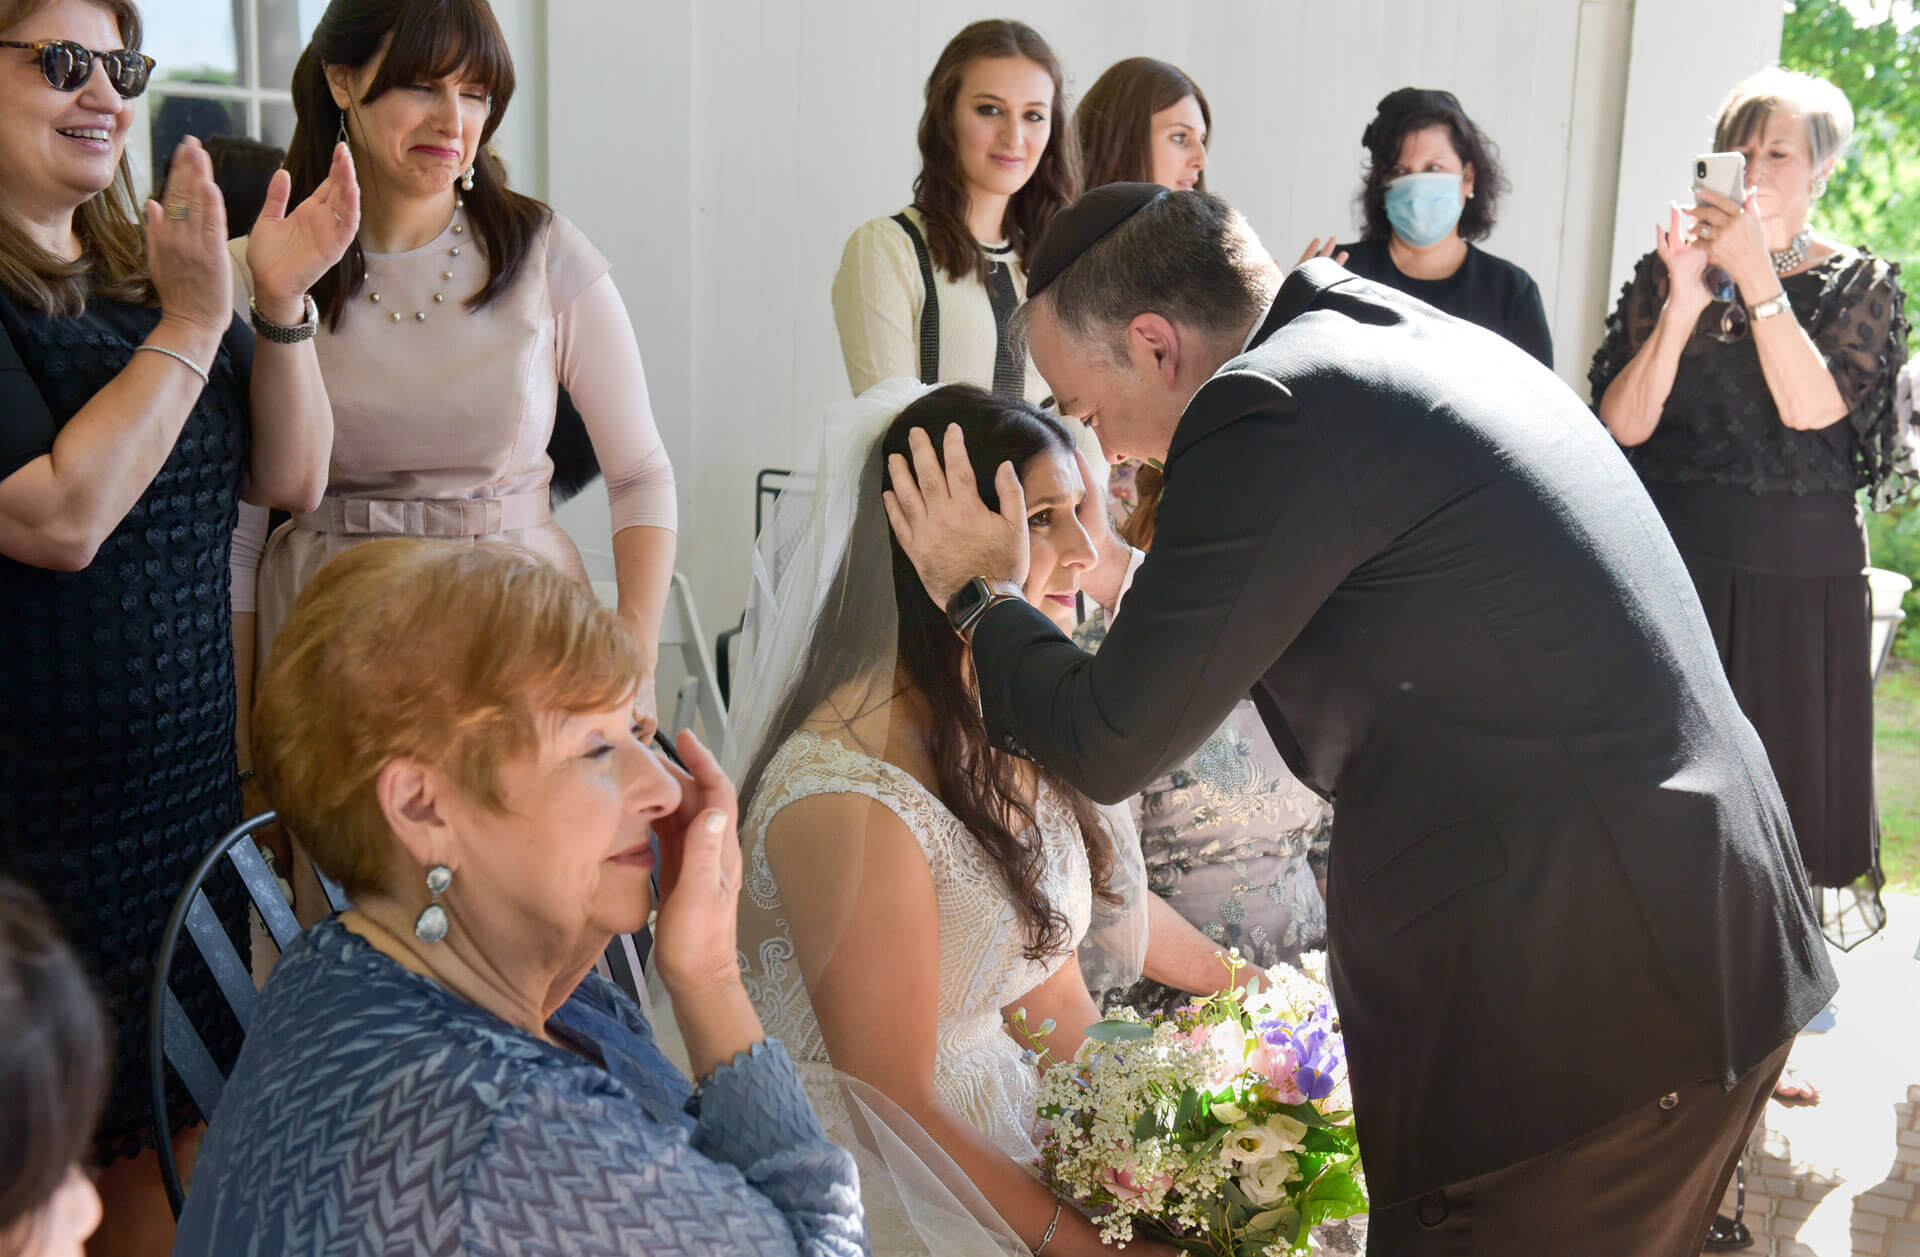 The bride receives a blessing from her brother during her orthodox Jewish wedding held during the pandemic at Waldenwoods Resort in Howell, Michigan.